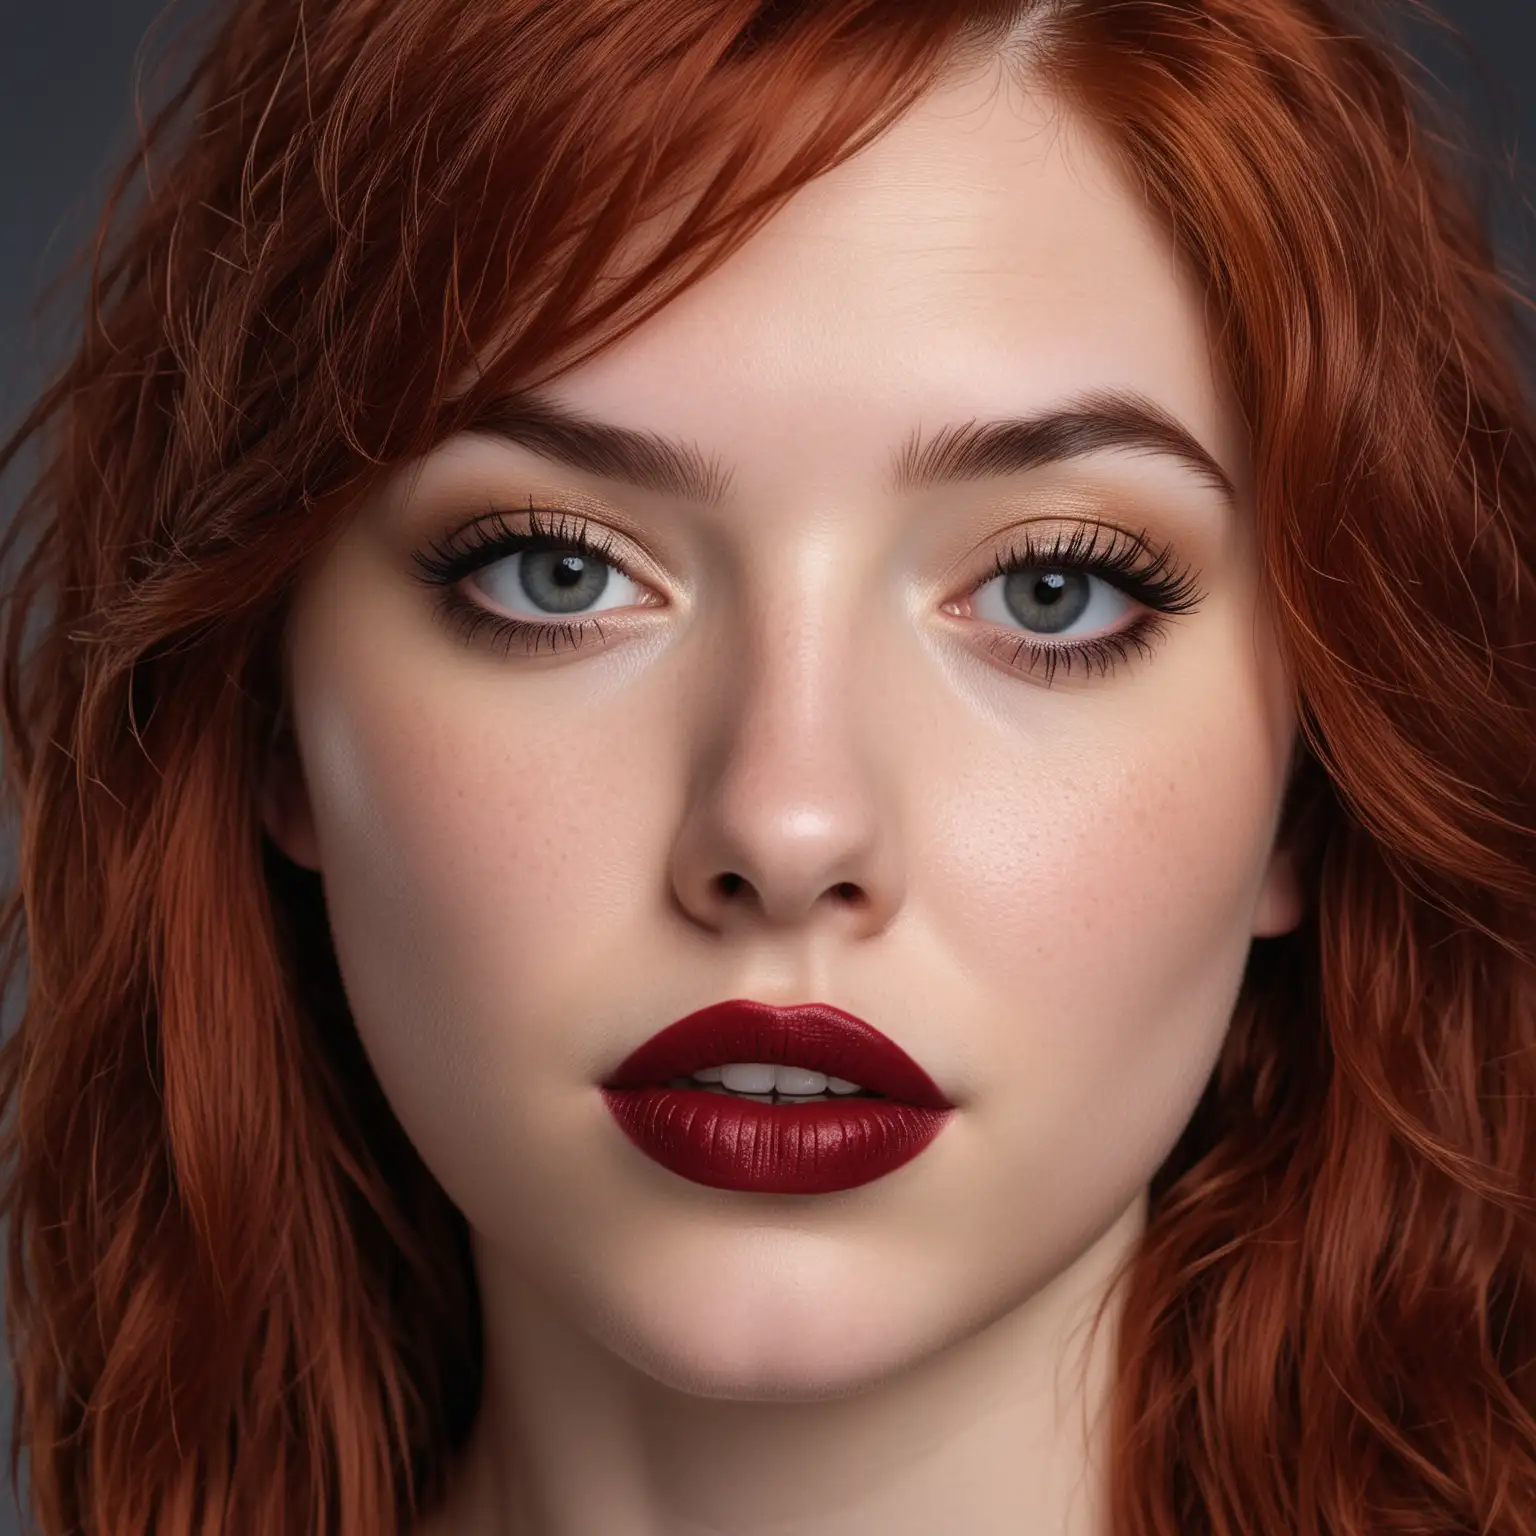 Close-up, acting headshot of an 18 year old female woman with red hair and black lipstick